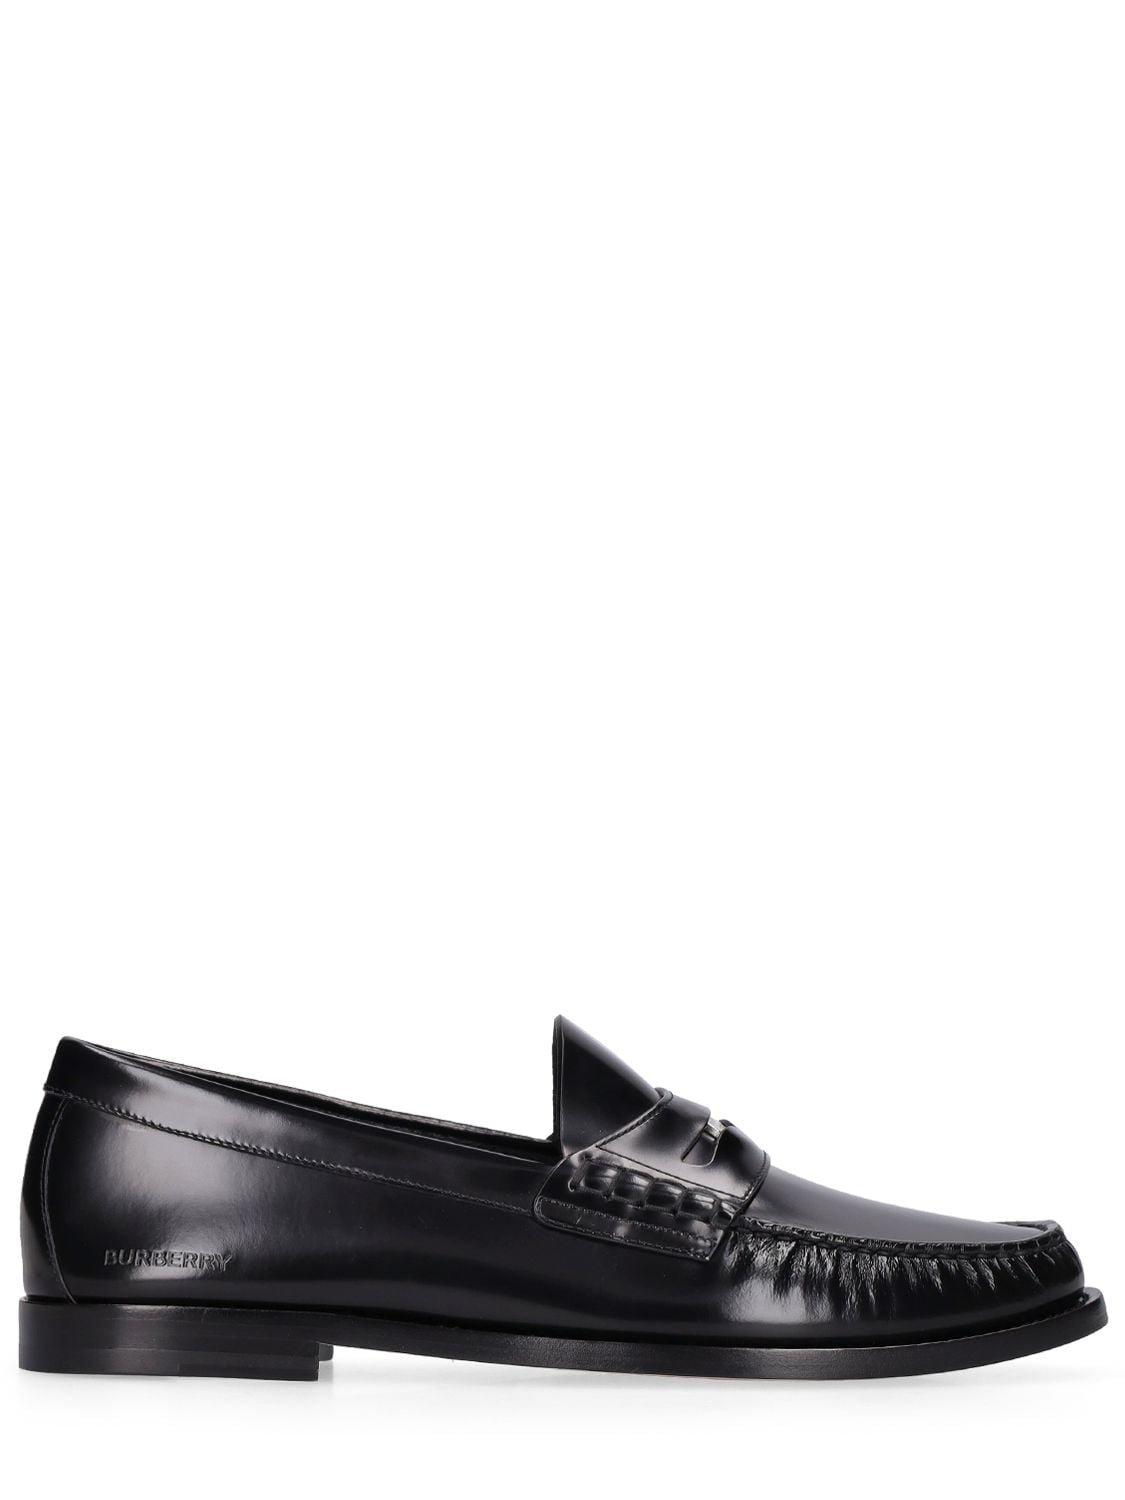 Burberry Rupert Grain Leather Loafers In Black | ModeSens